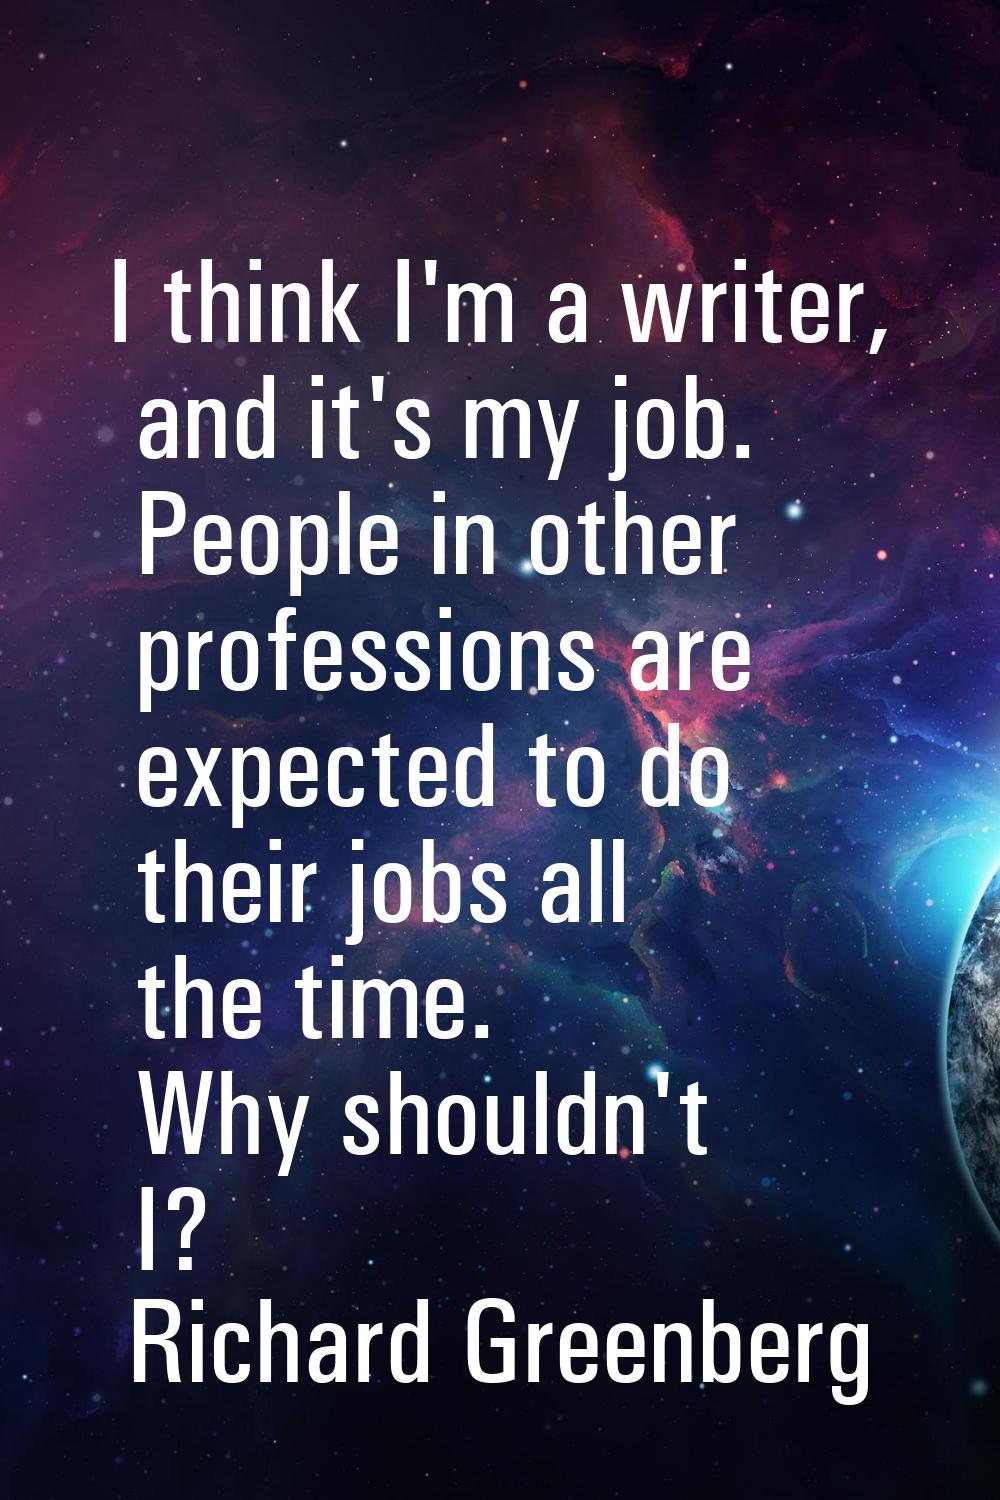 I think I'm a writer, and it's my job. People in other professions are expected to do their jobs al